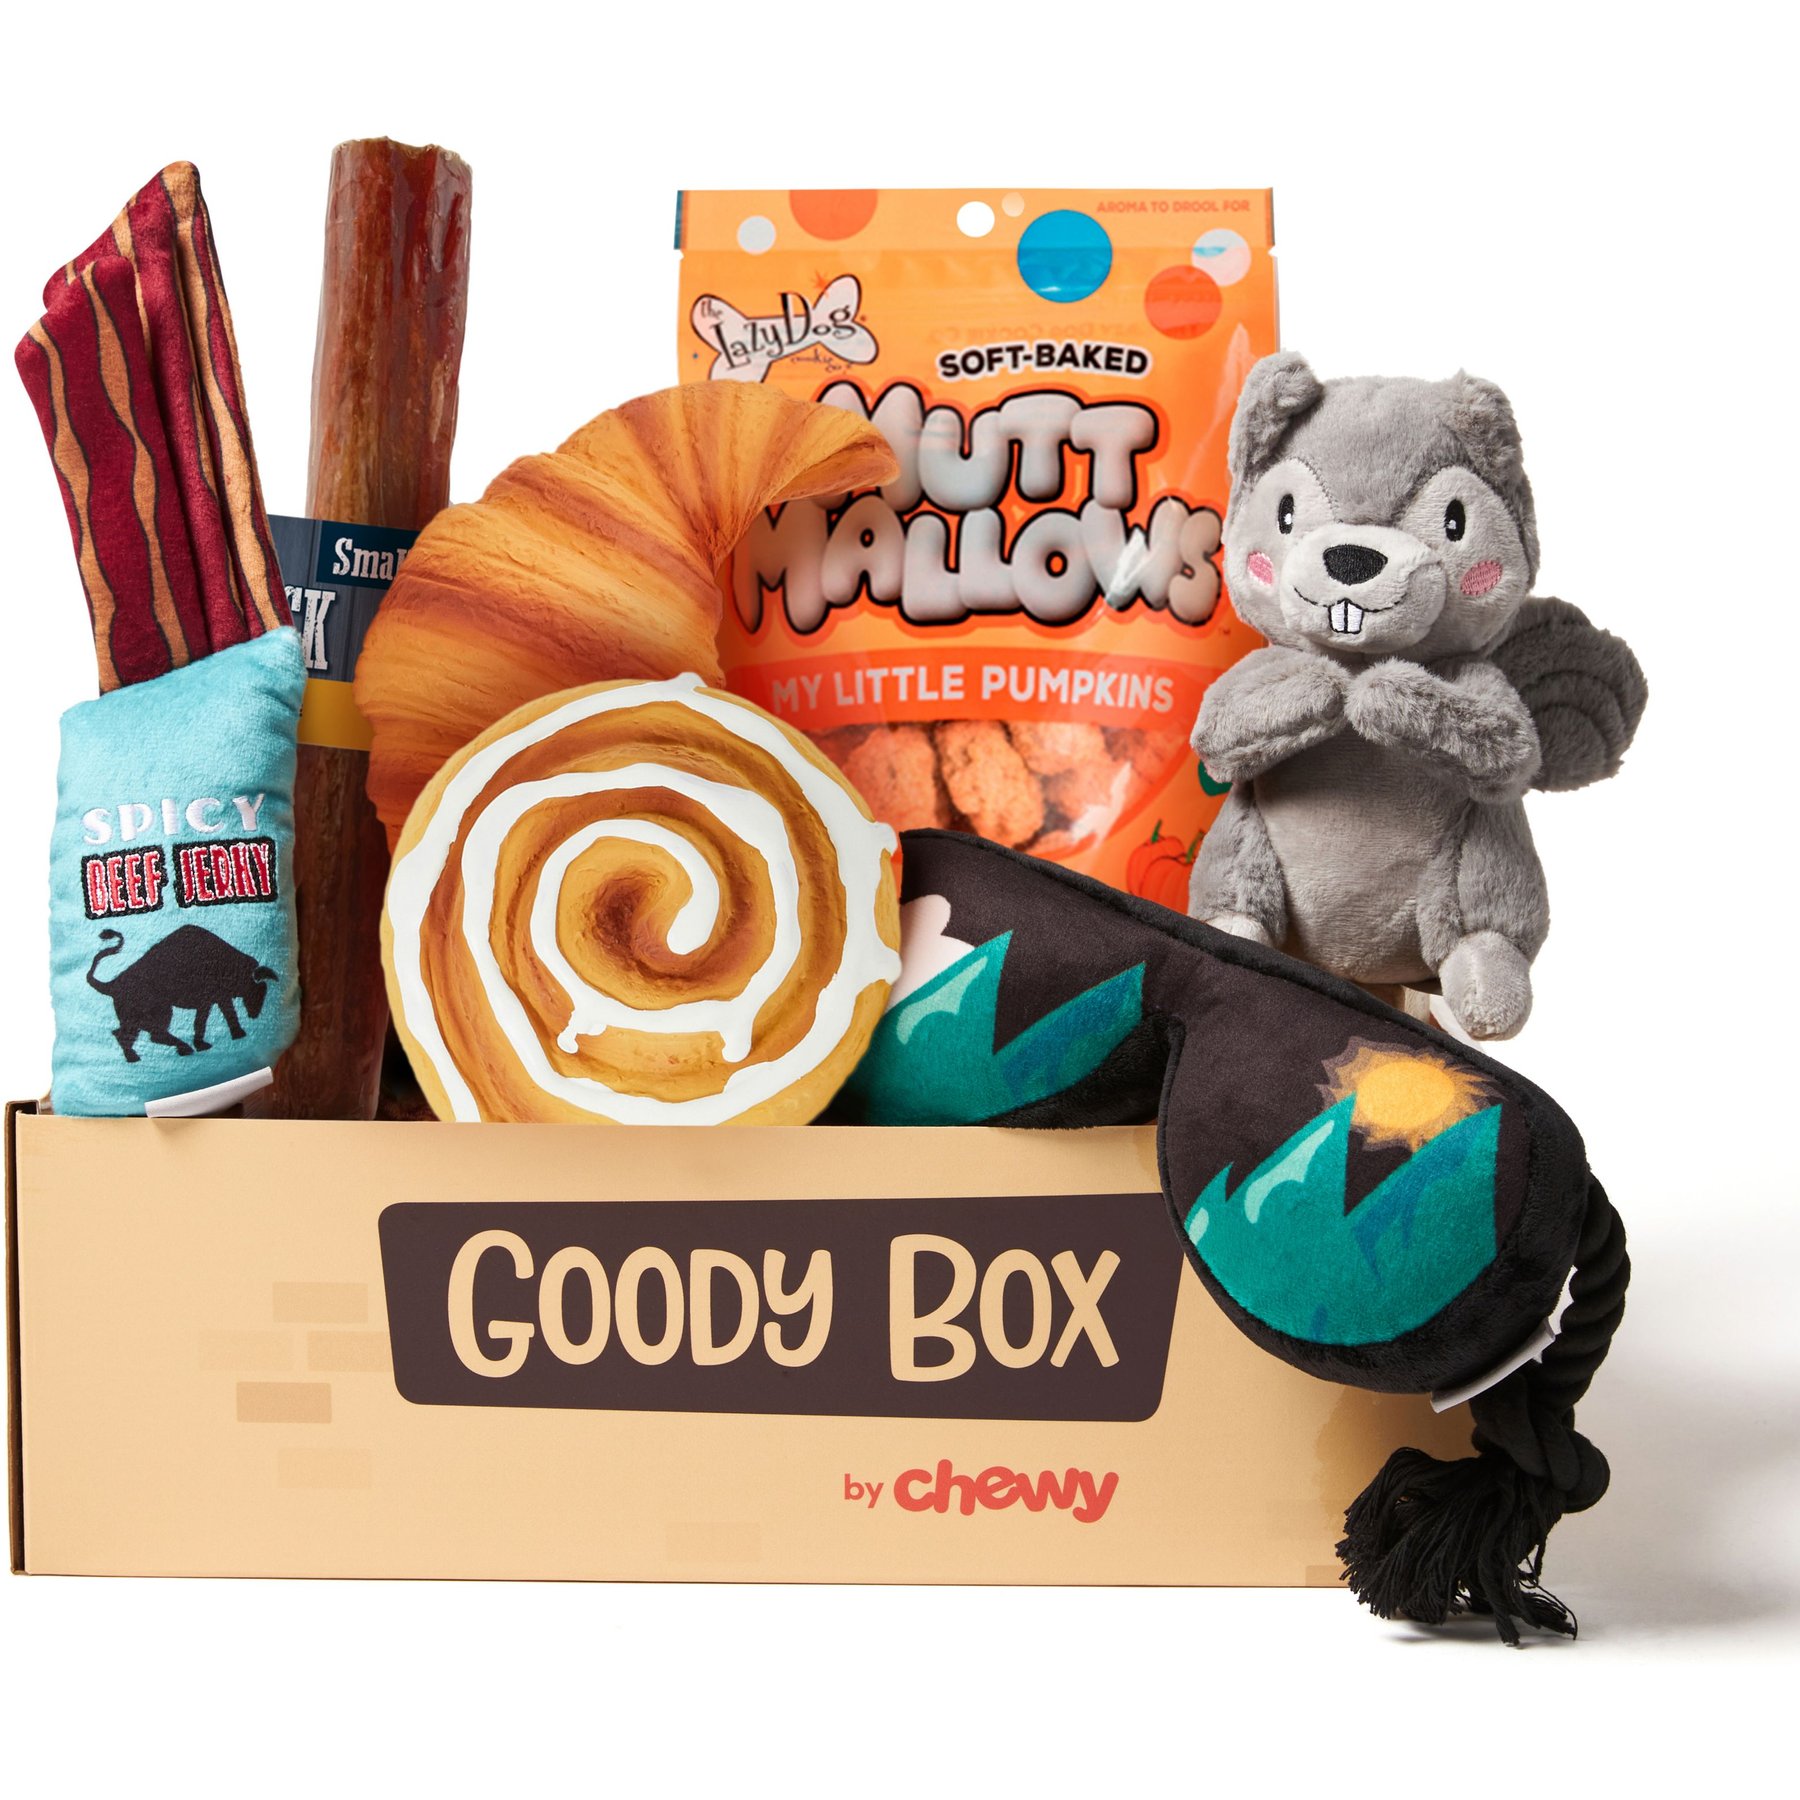 Bark Box 3-in-1 Dog Toy Protein Powder 2 Squeakers & Crinkles, Hide Treats